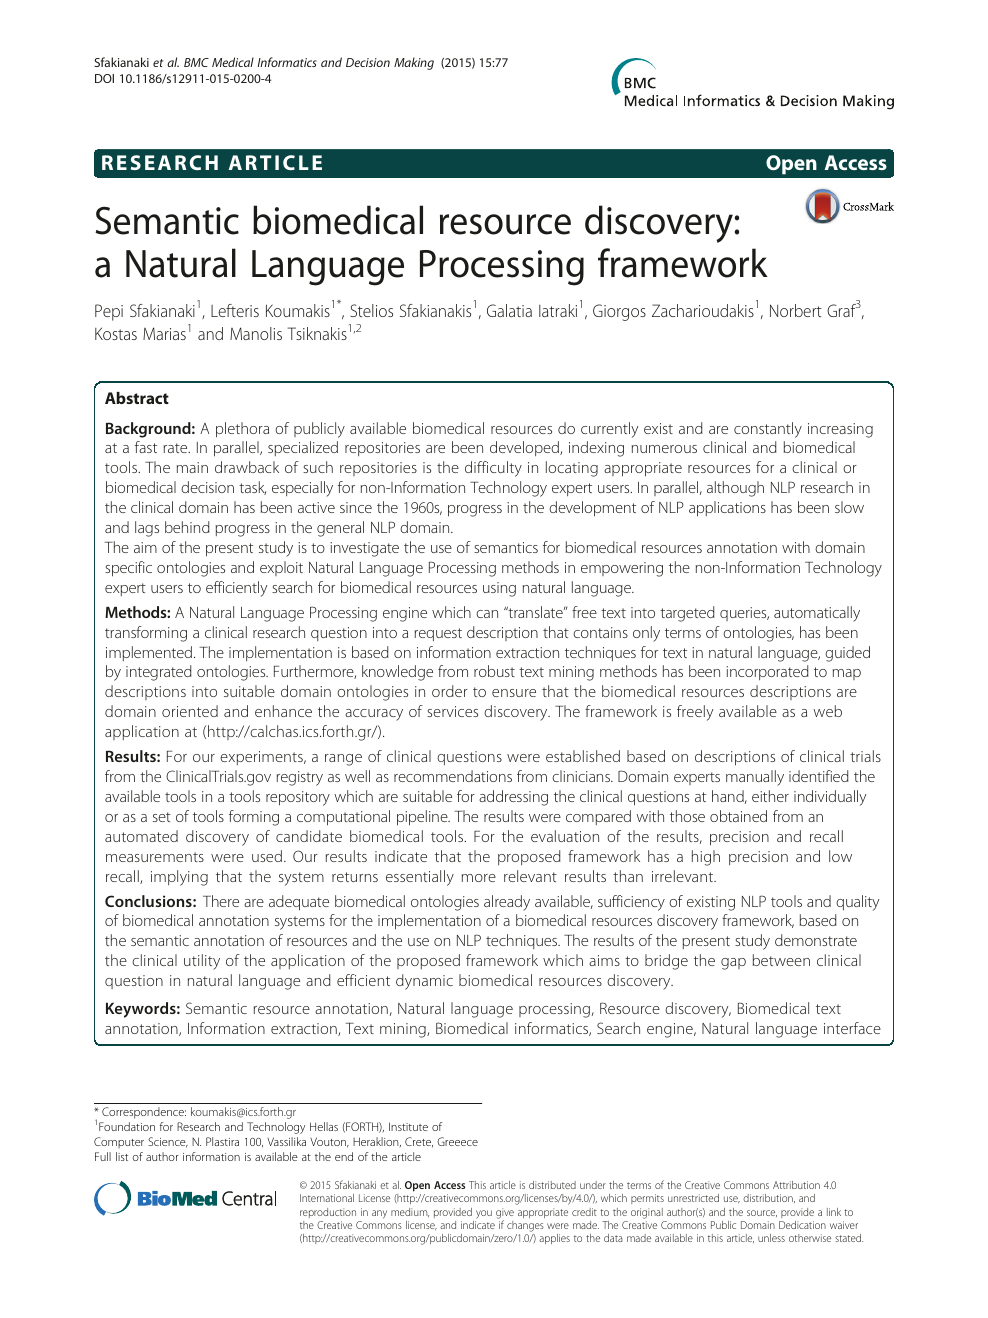 PDF) Mining and Ranking Biomedical Synonym Candidates from Wikipedia